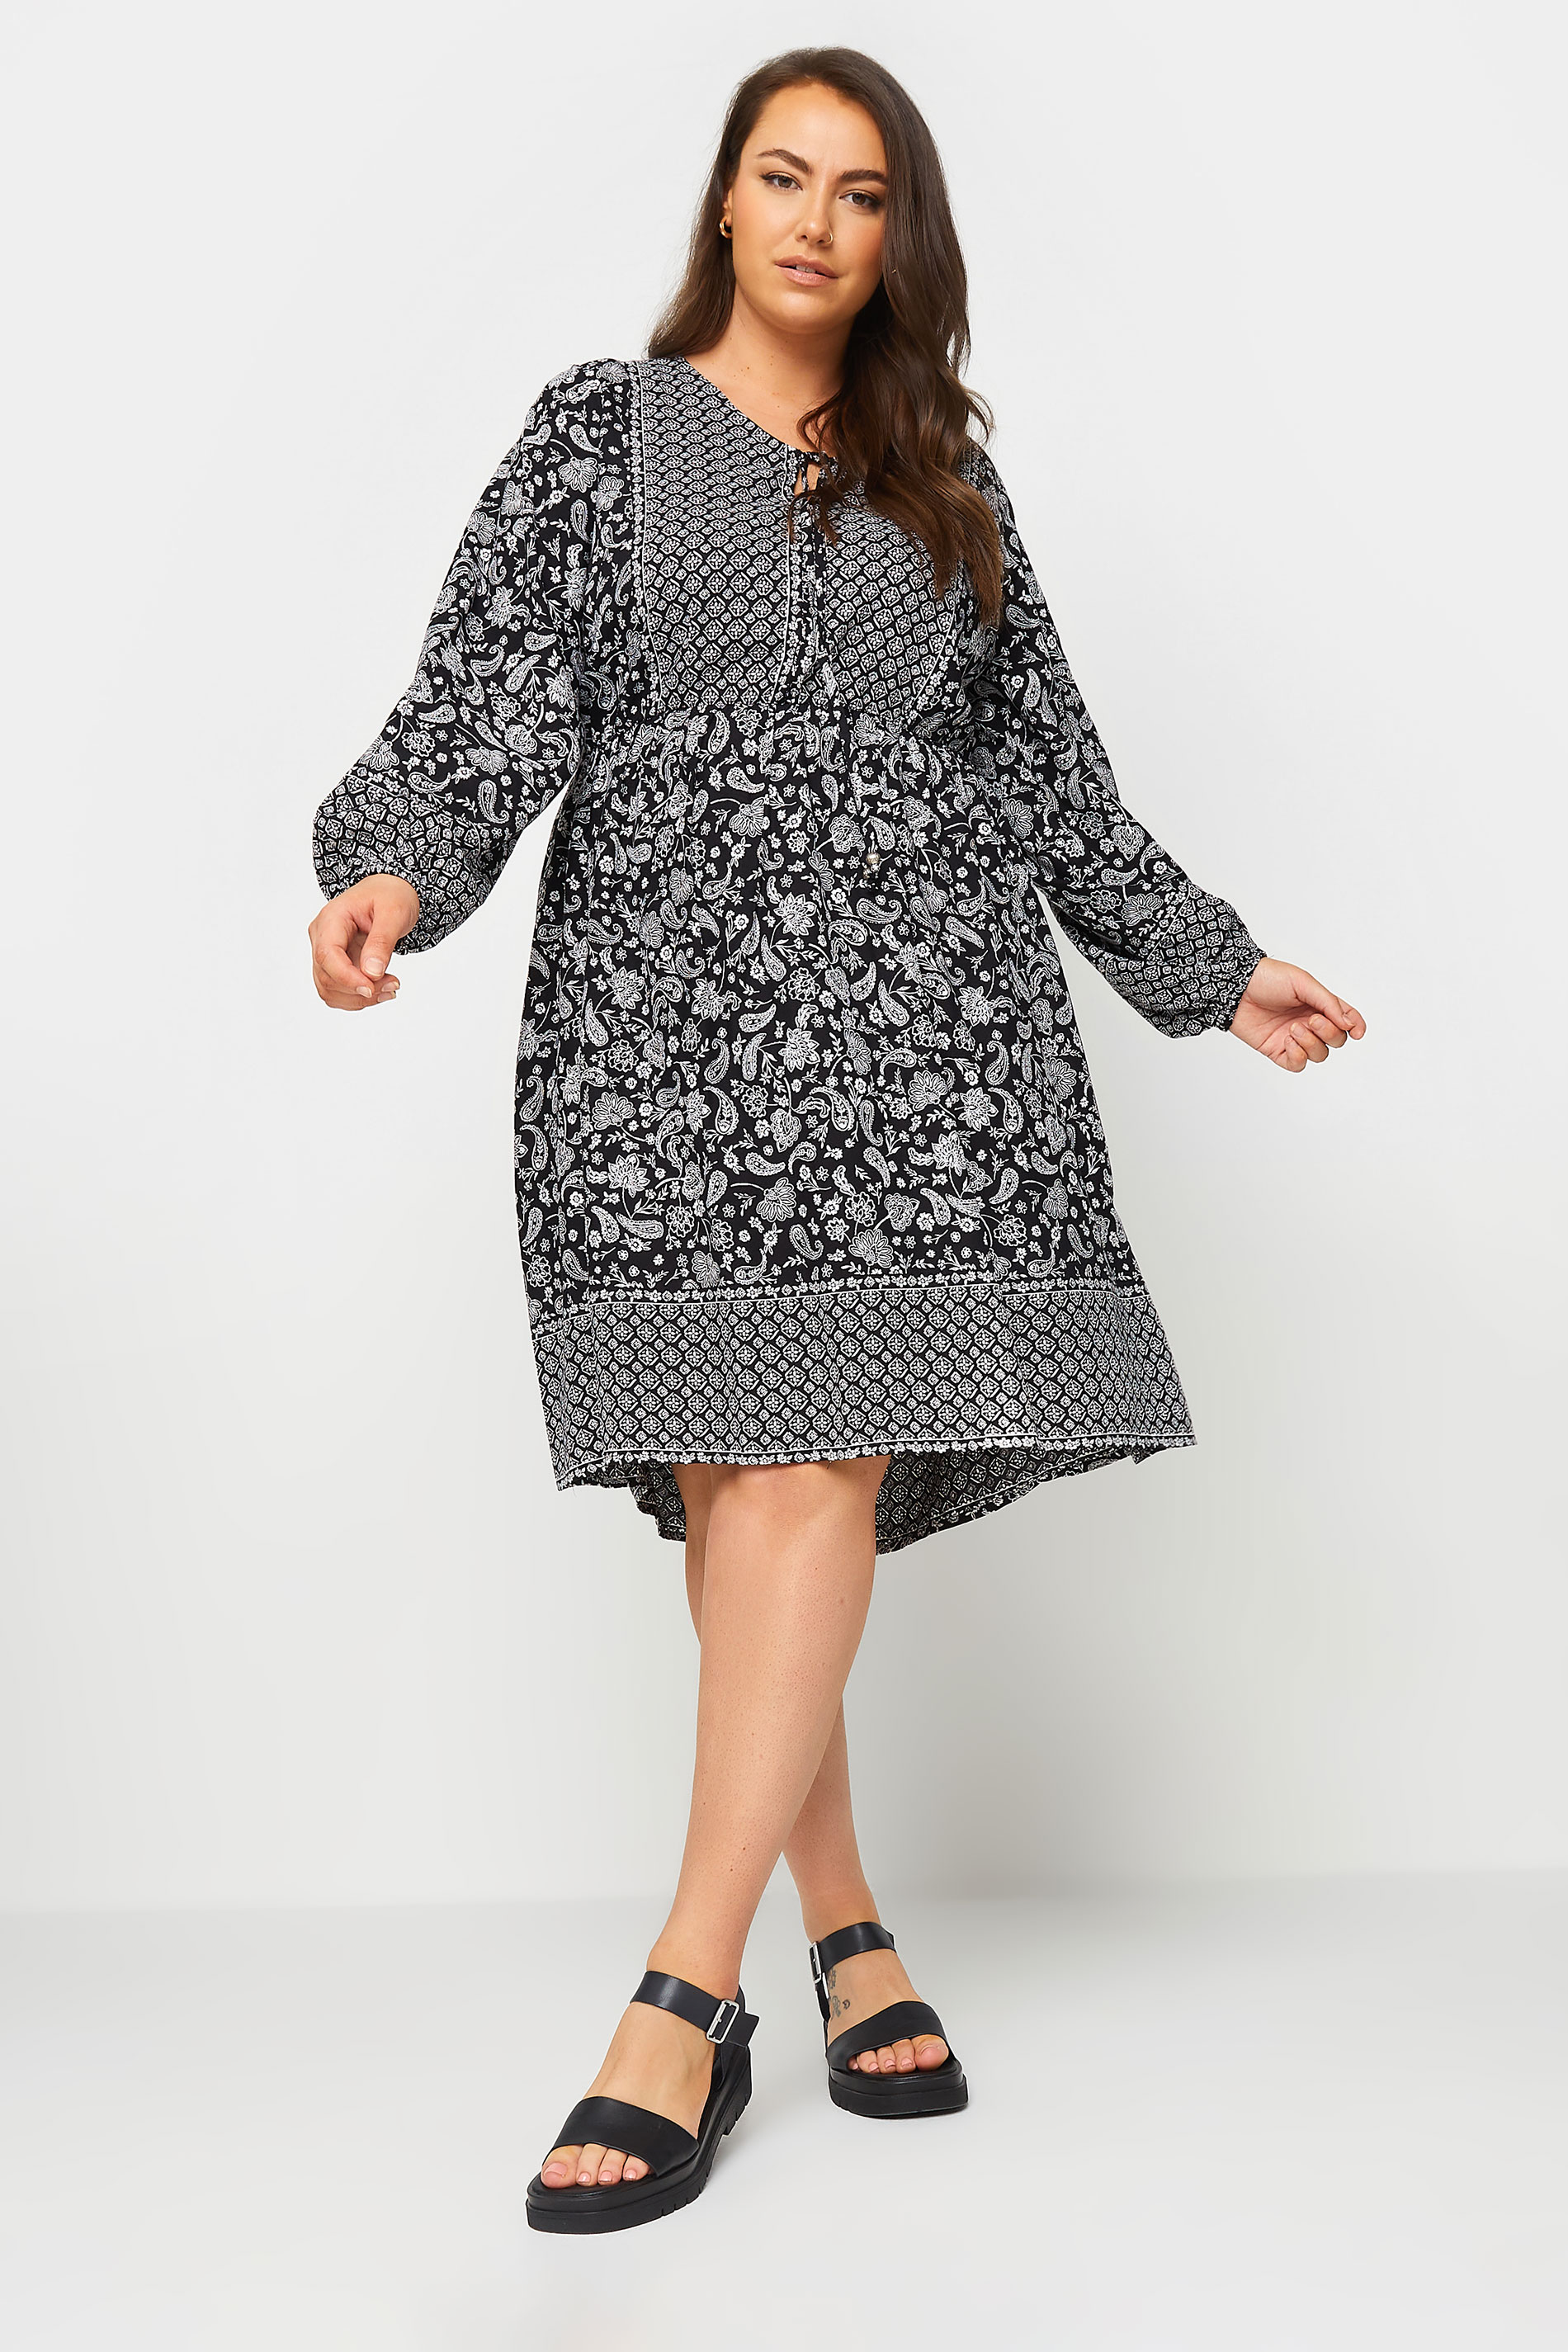 YOURS Plus Size Black Paisley Print Smock Dress | Yours Clothing 2